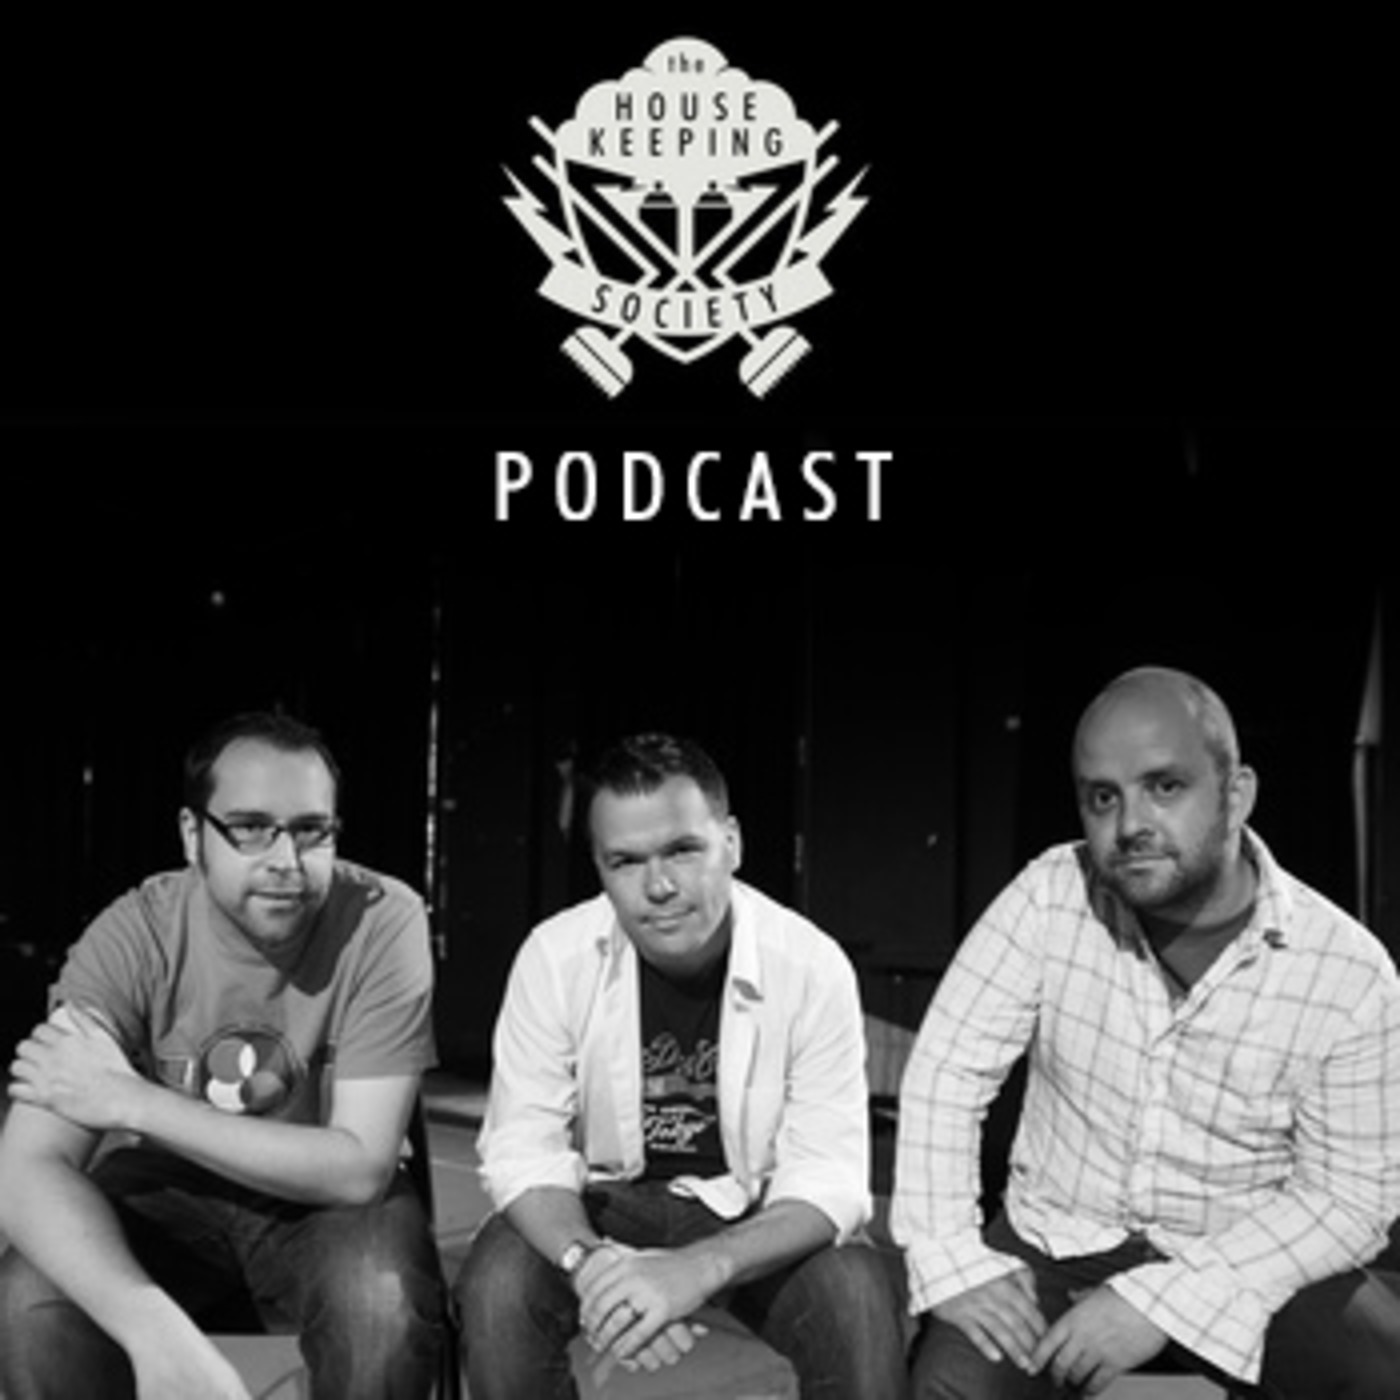 The Housekeeping Society Podcast